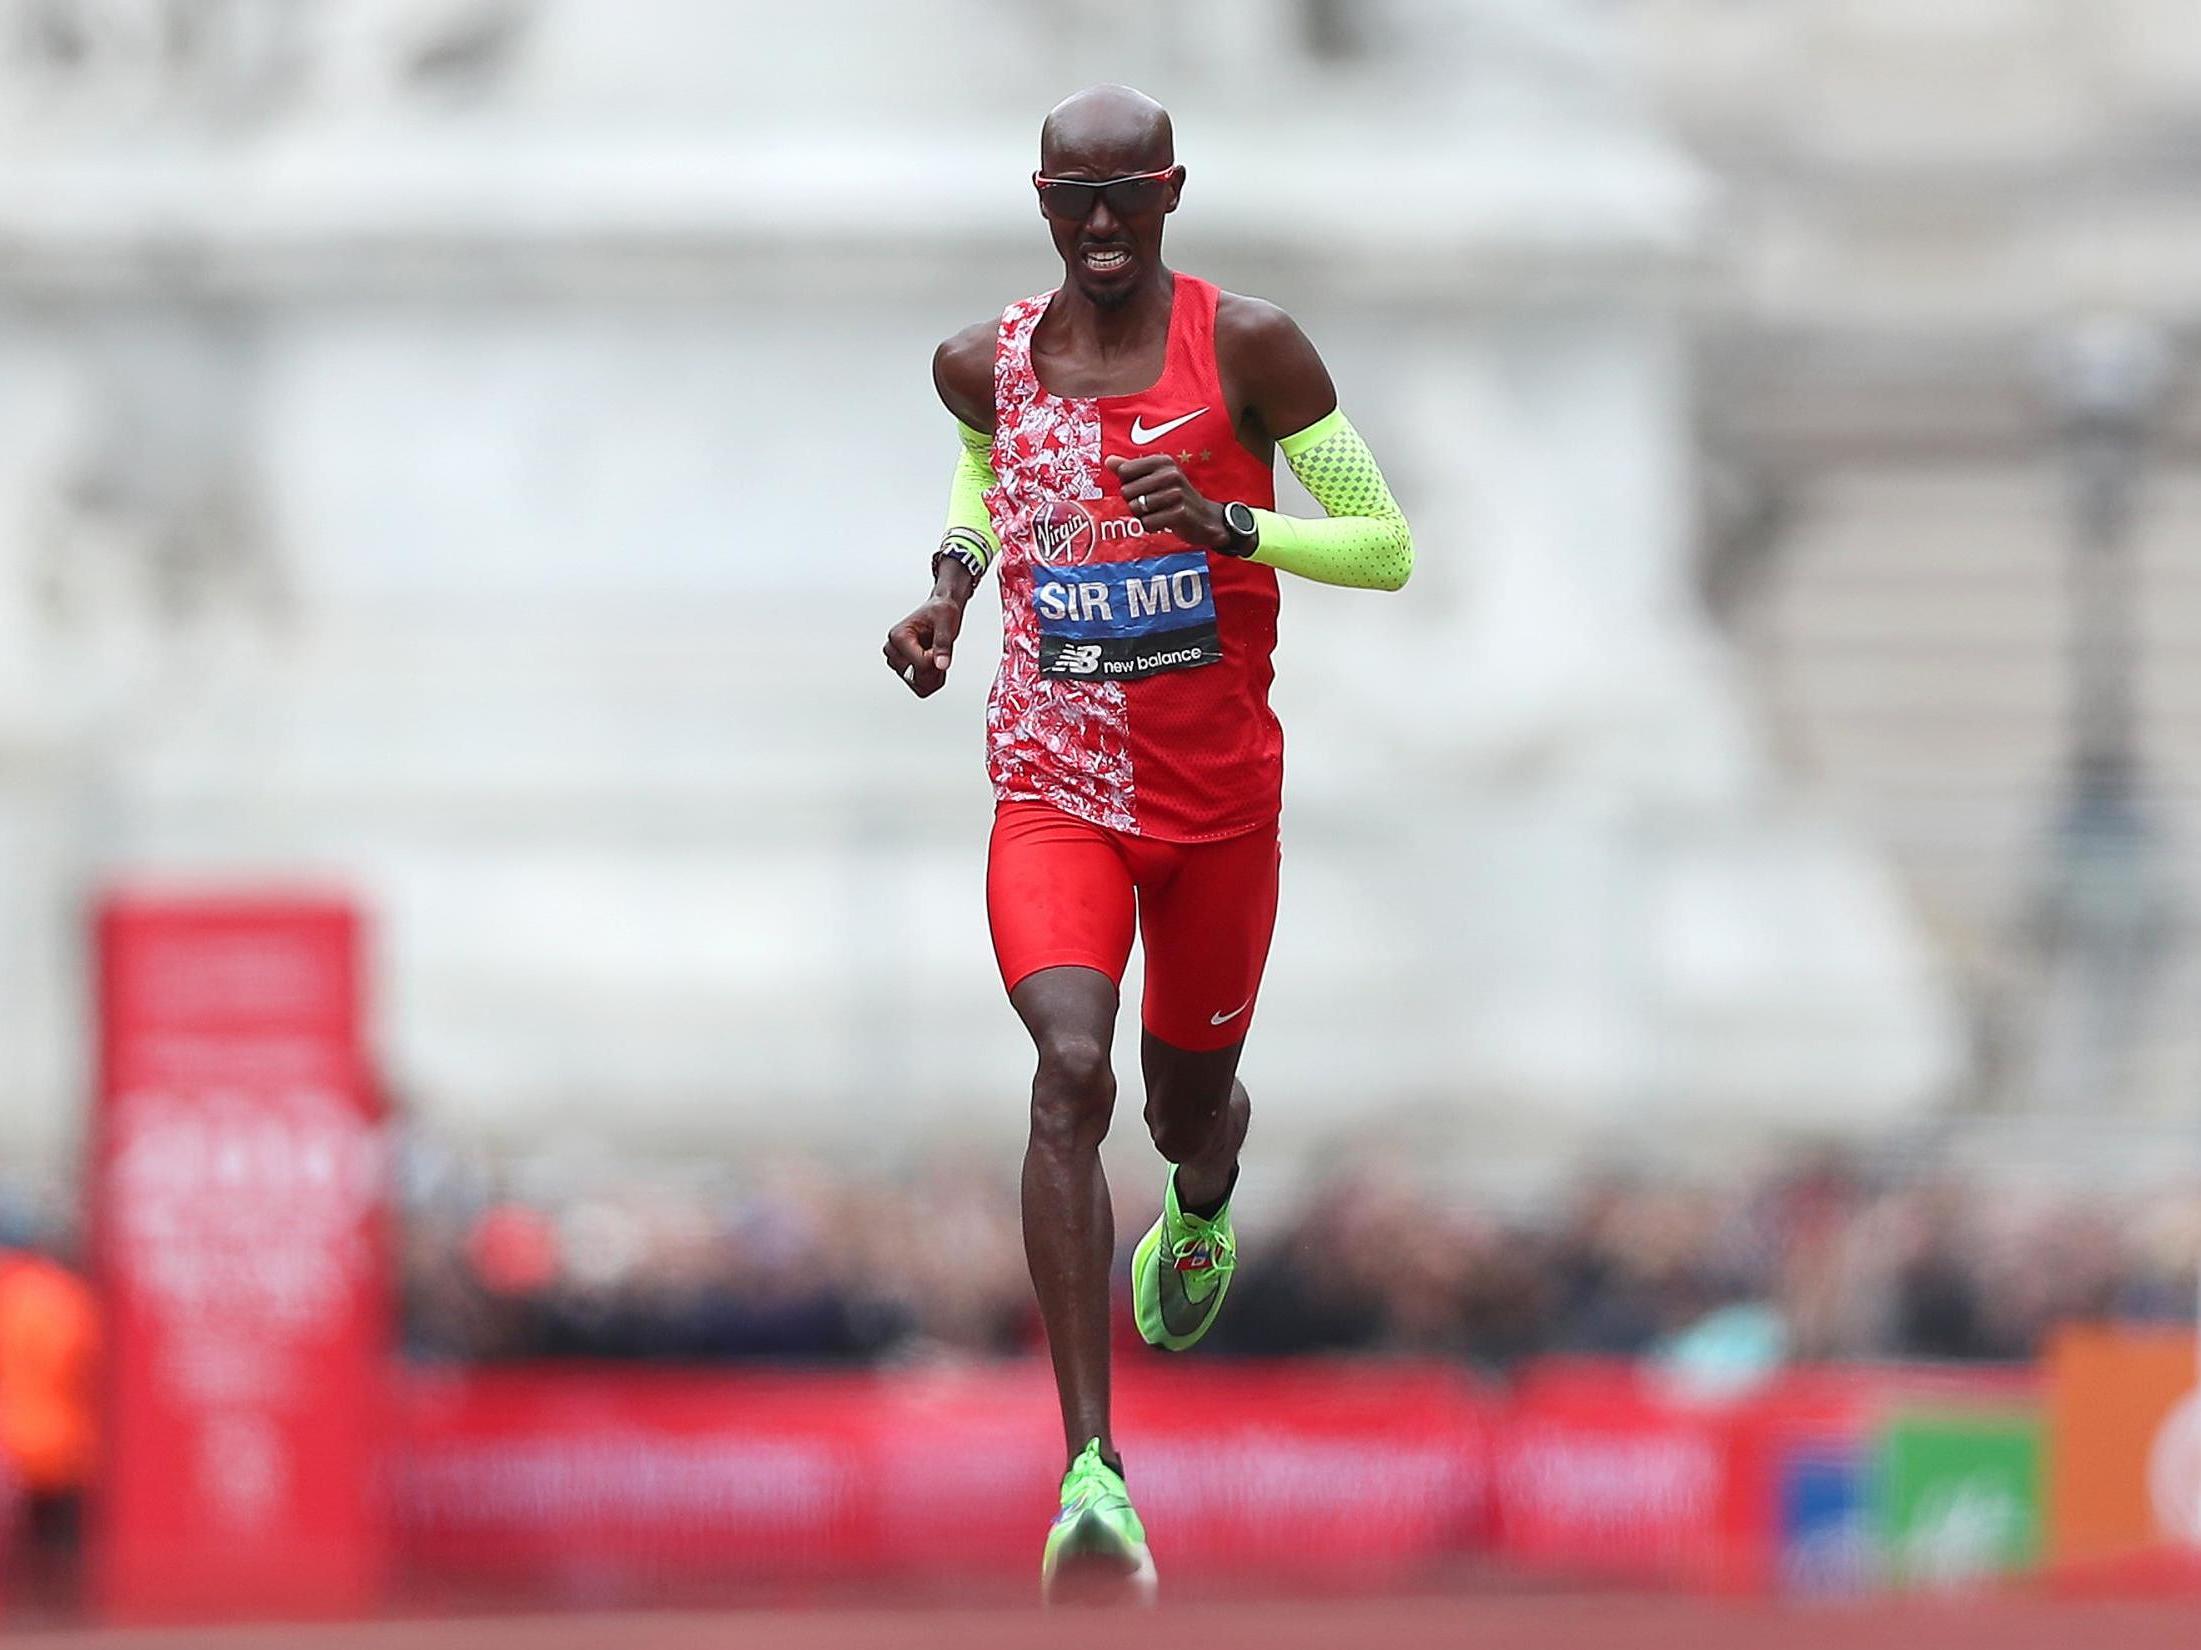 Sir Mo Farah news, breaking stories and comment